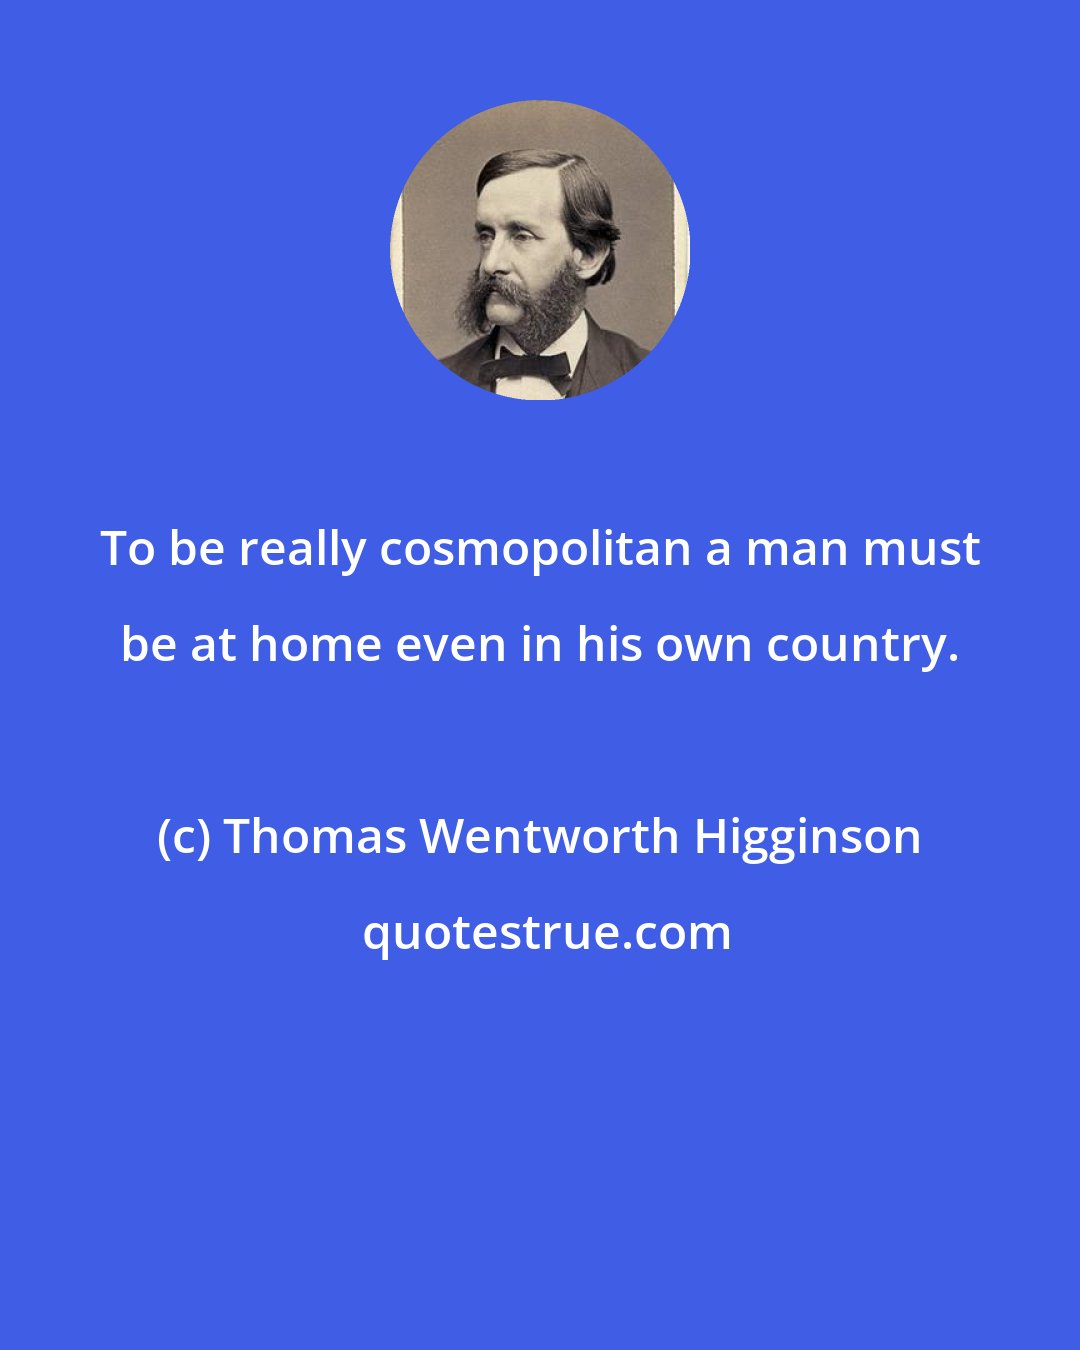 Thomas Wentworth Higginson: To be really cosmopolitan a man must be at home even in his own country.